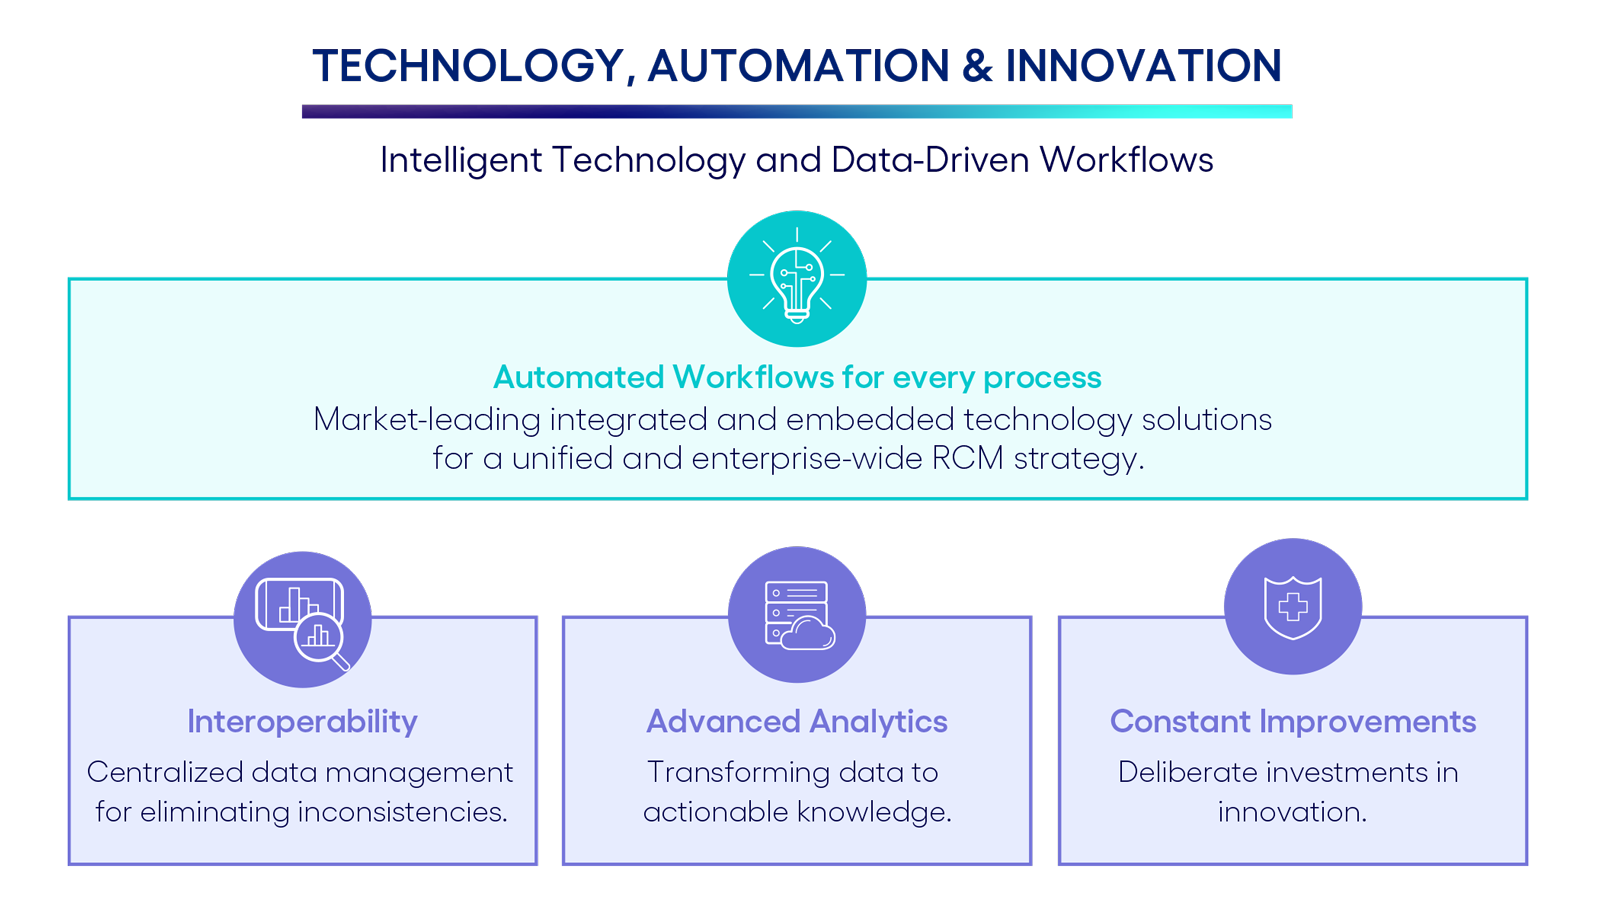 Technology Automation and Innovation